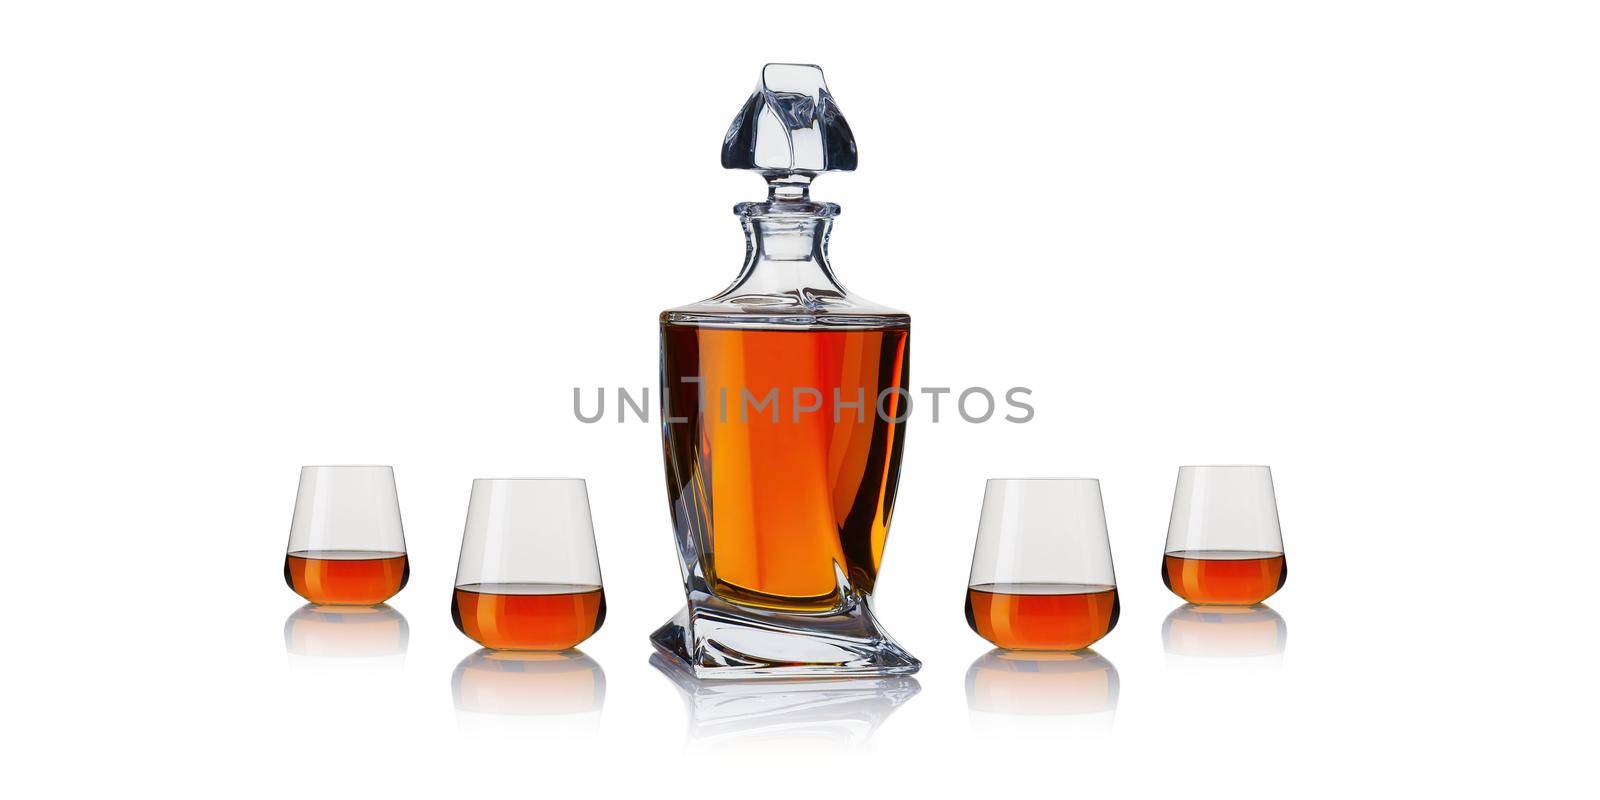 Decanter with cognac. Whiskey decanter on white background. by PhotoTime